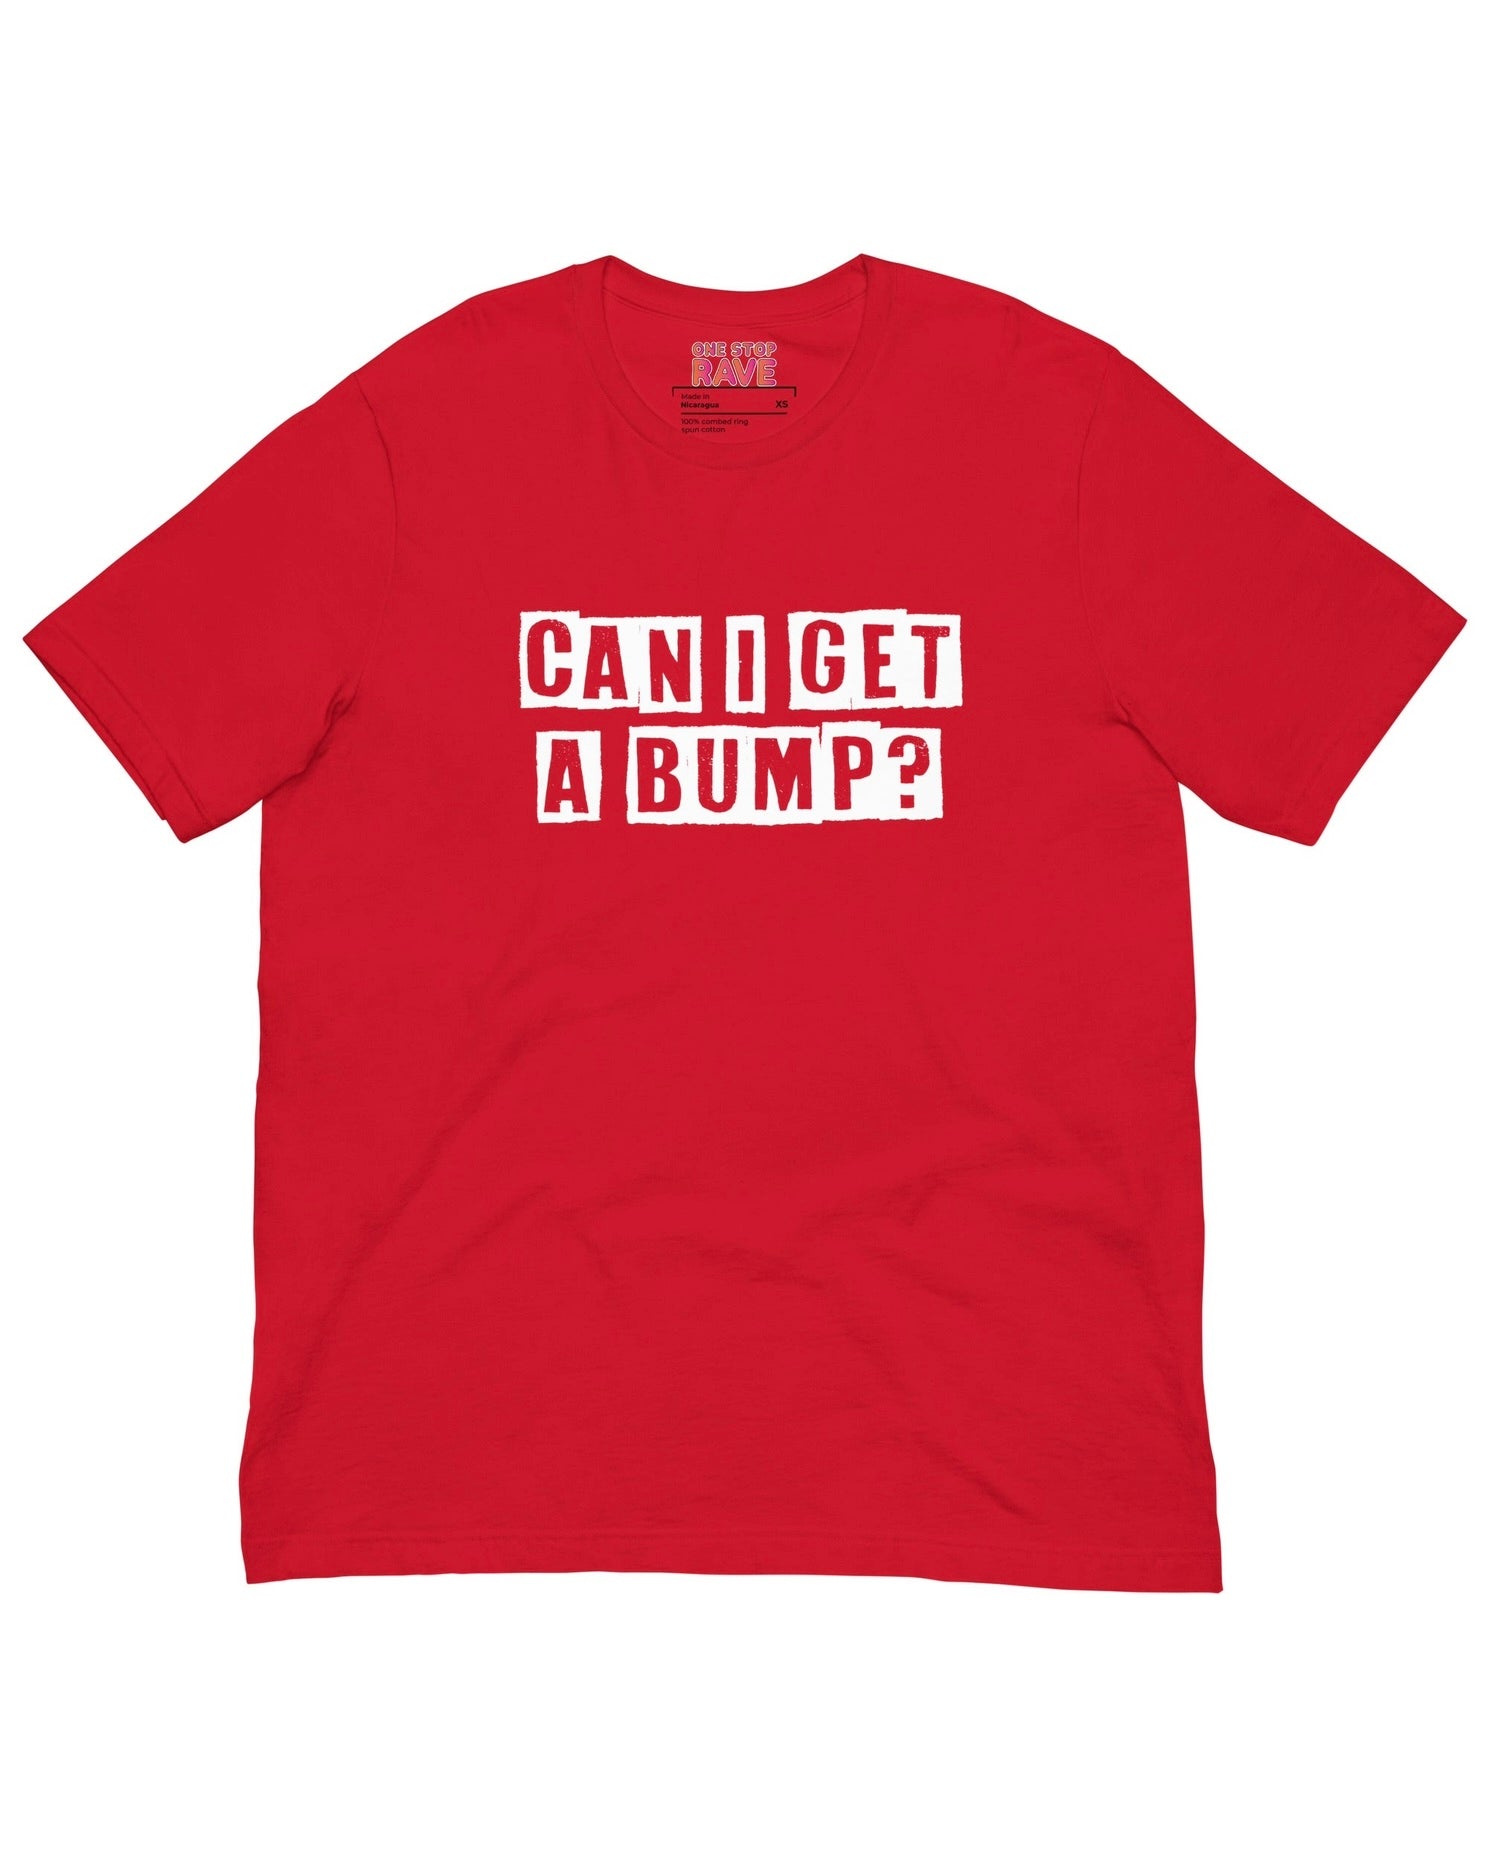 Red t-shirt with the phrase "CAN I GET A BUMP?" & OSR label